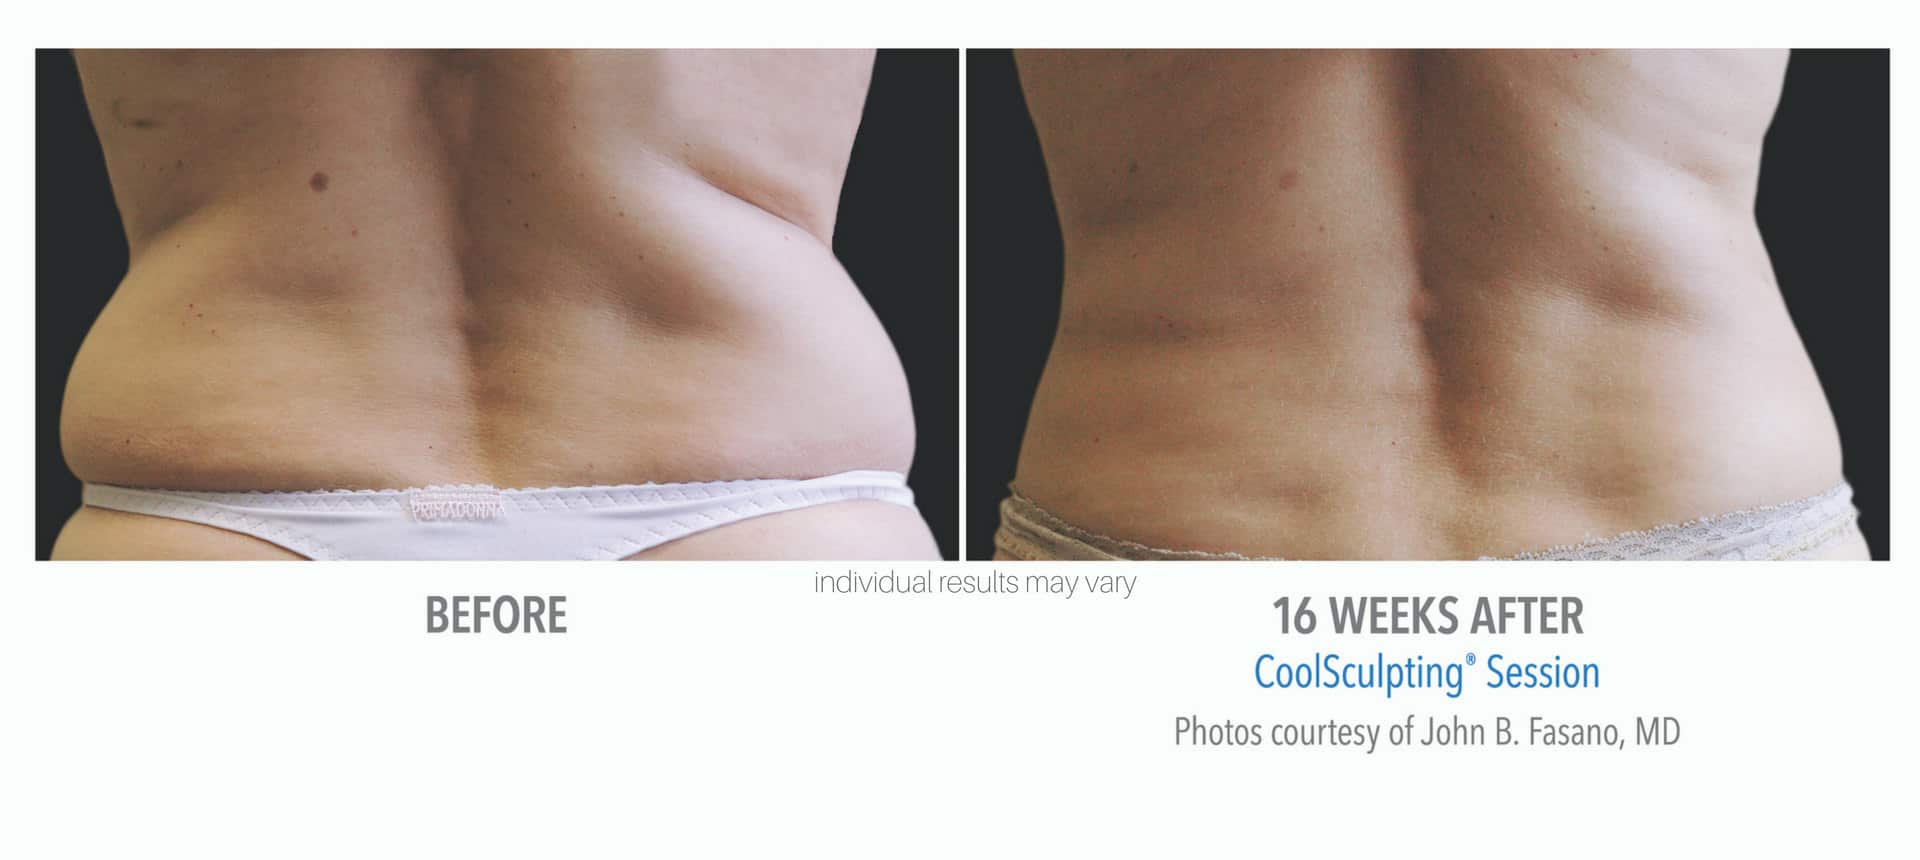 Woman's back before and after coolsculpting treatment.